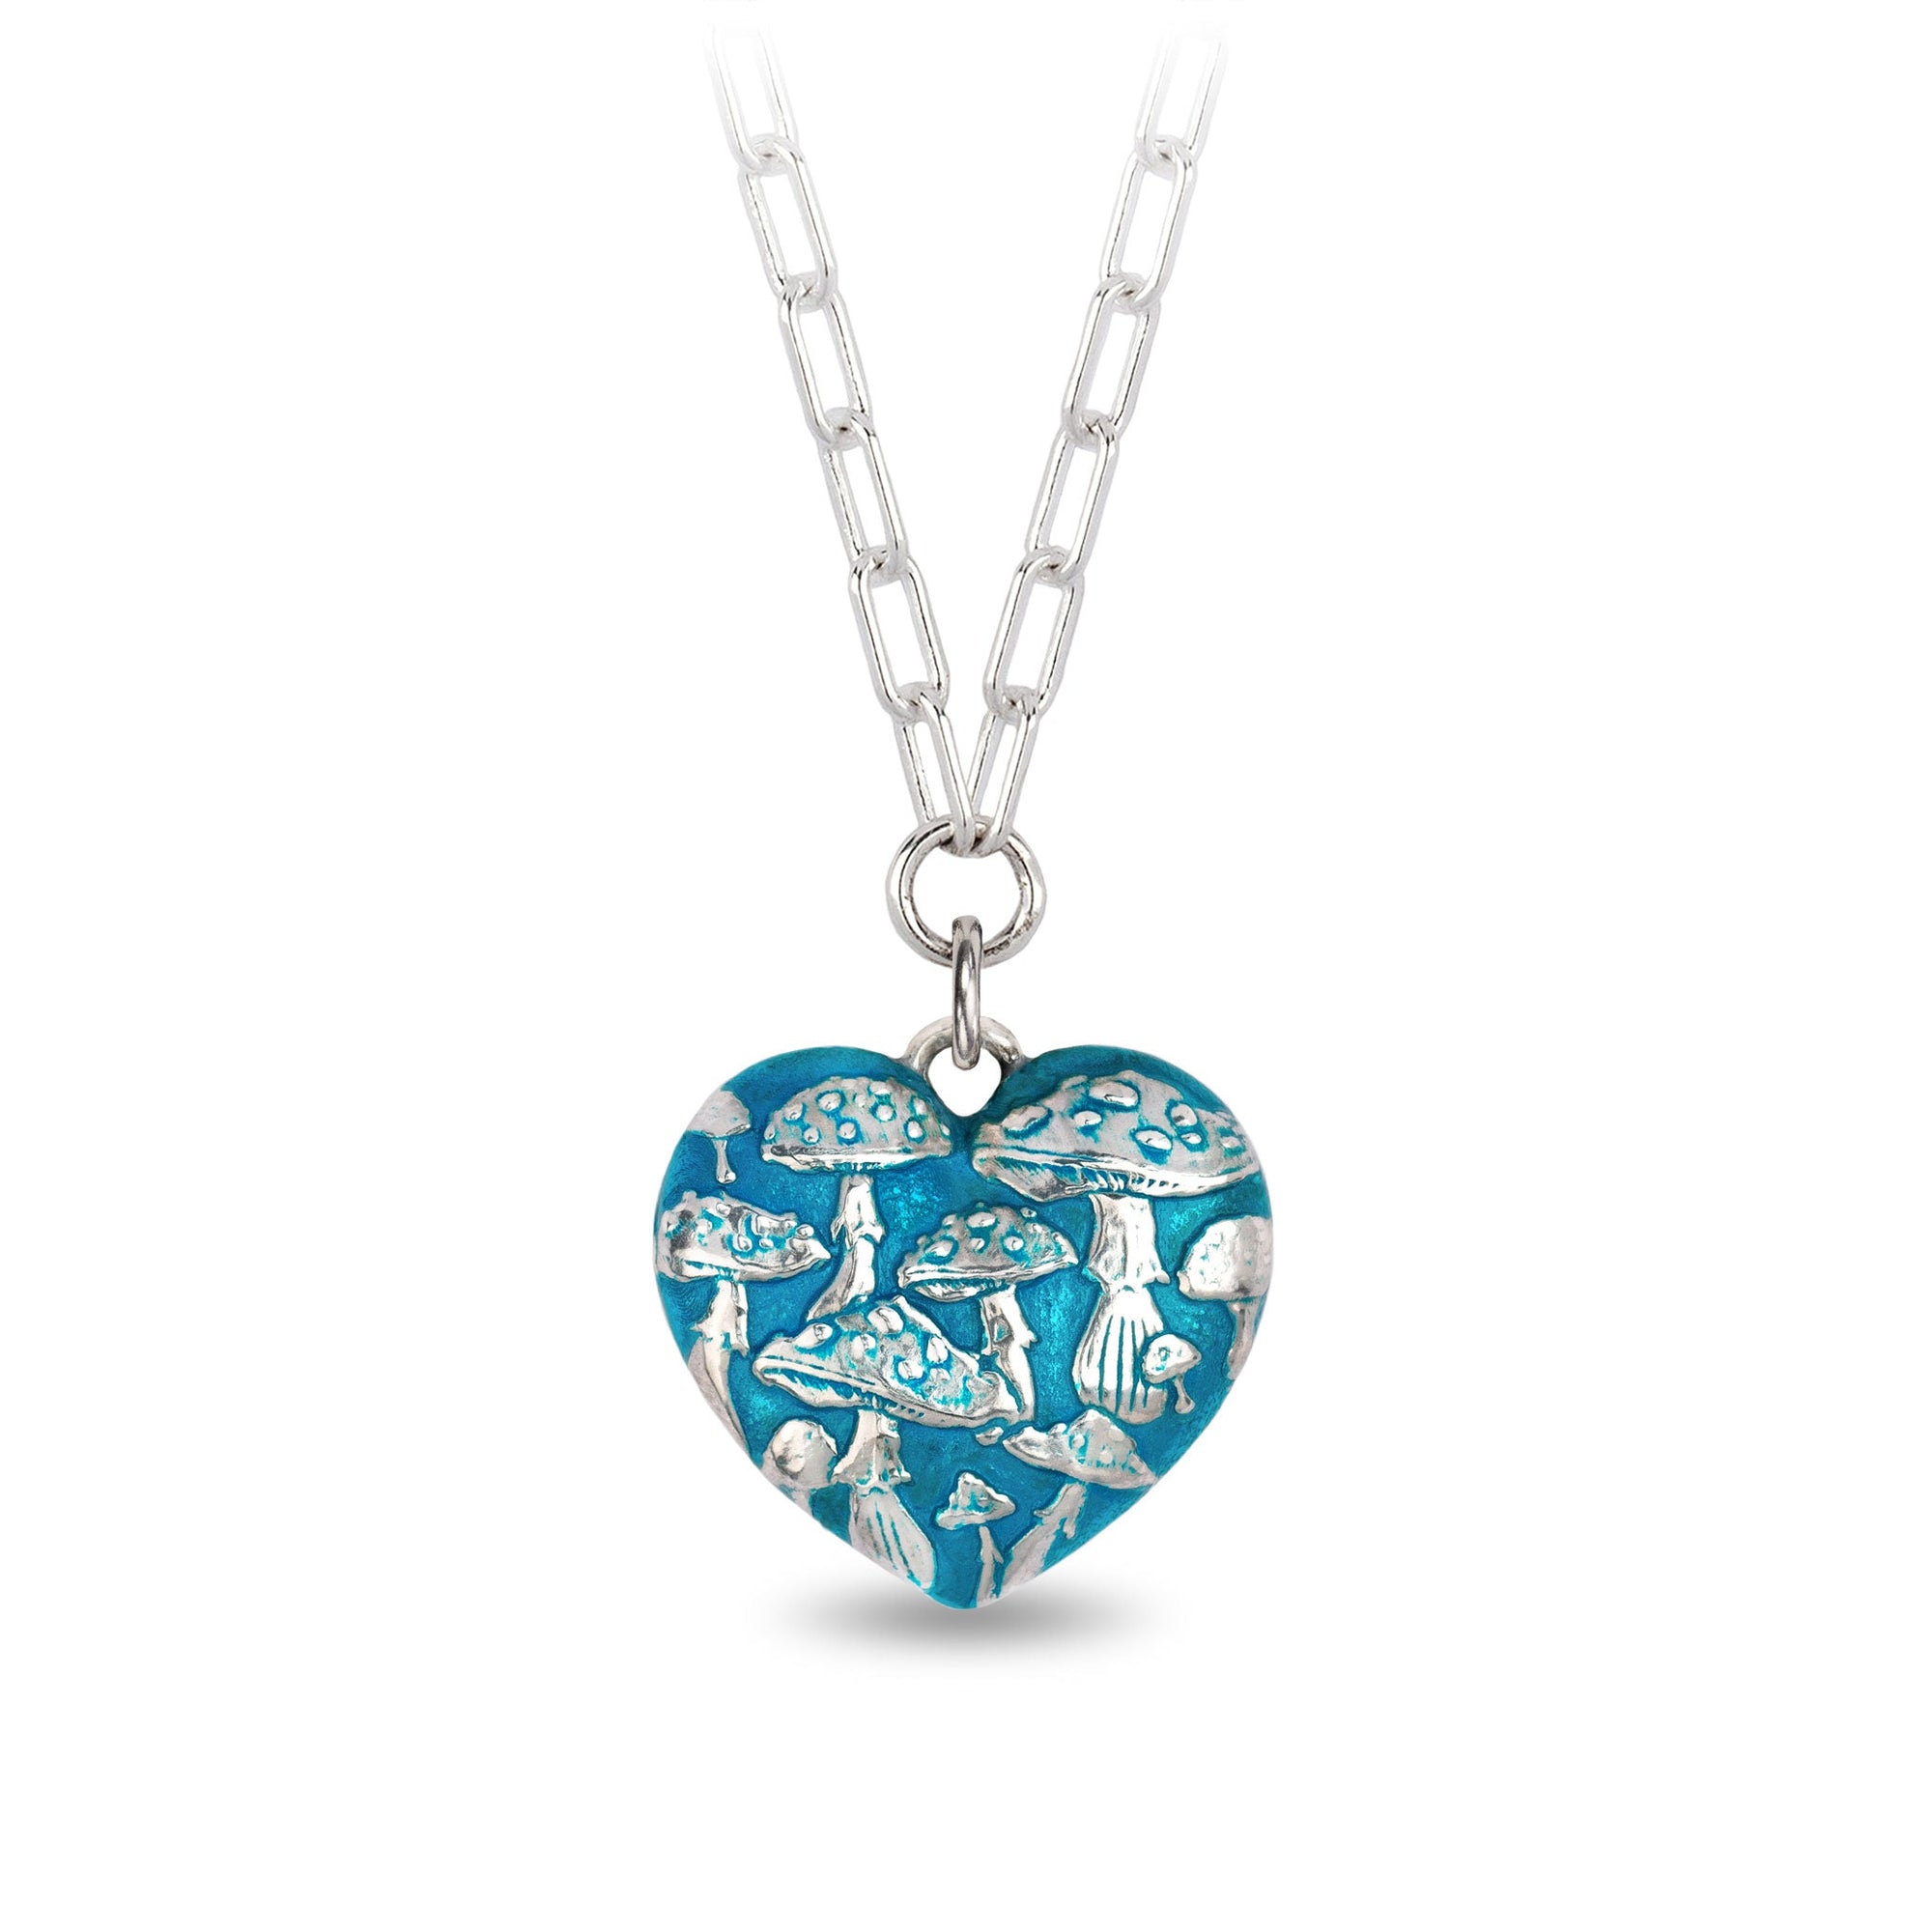 Mushroom Large Puffed Heart Small Paperclip Chain Necklace - Capri Blue